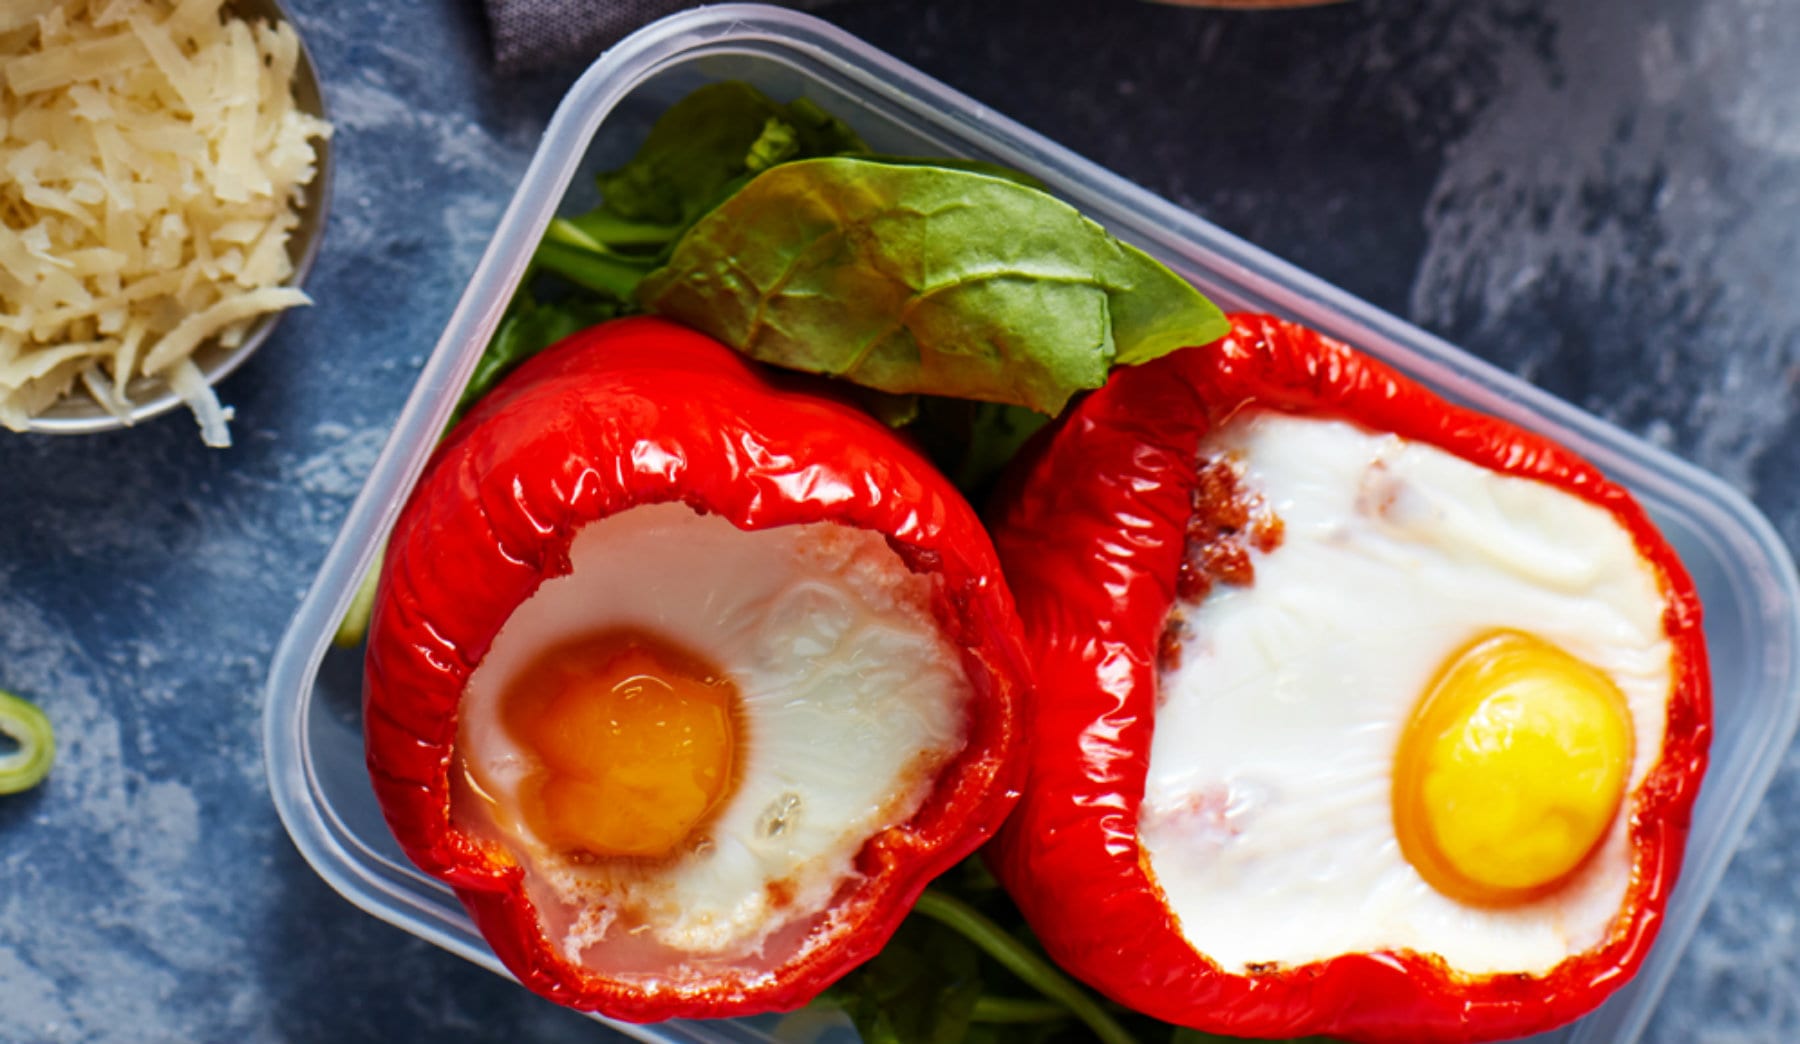 4 Delicious Healthy Stuffed Peppers | Quick Breakfast & Lunch